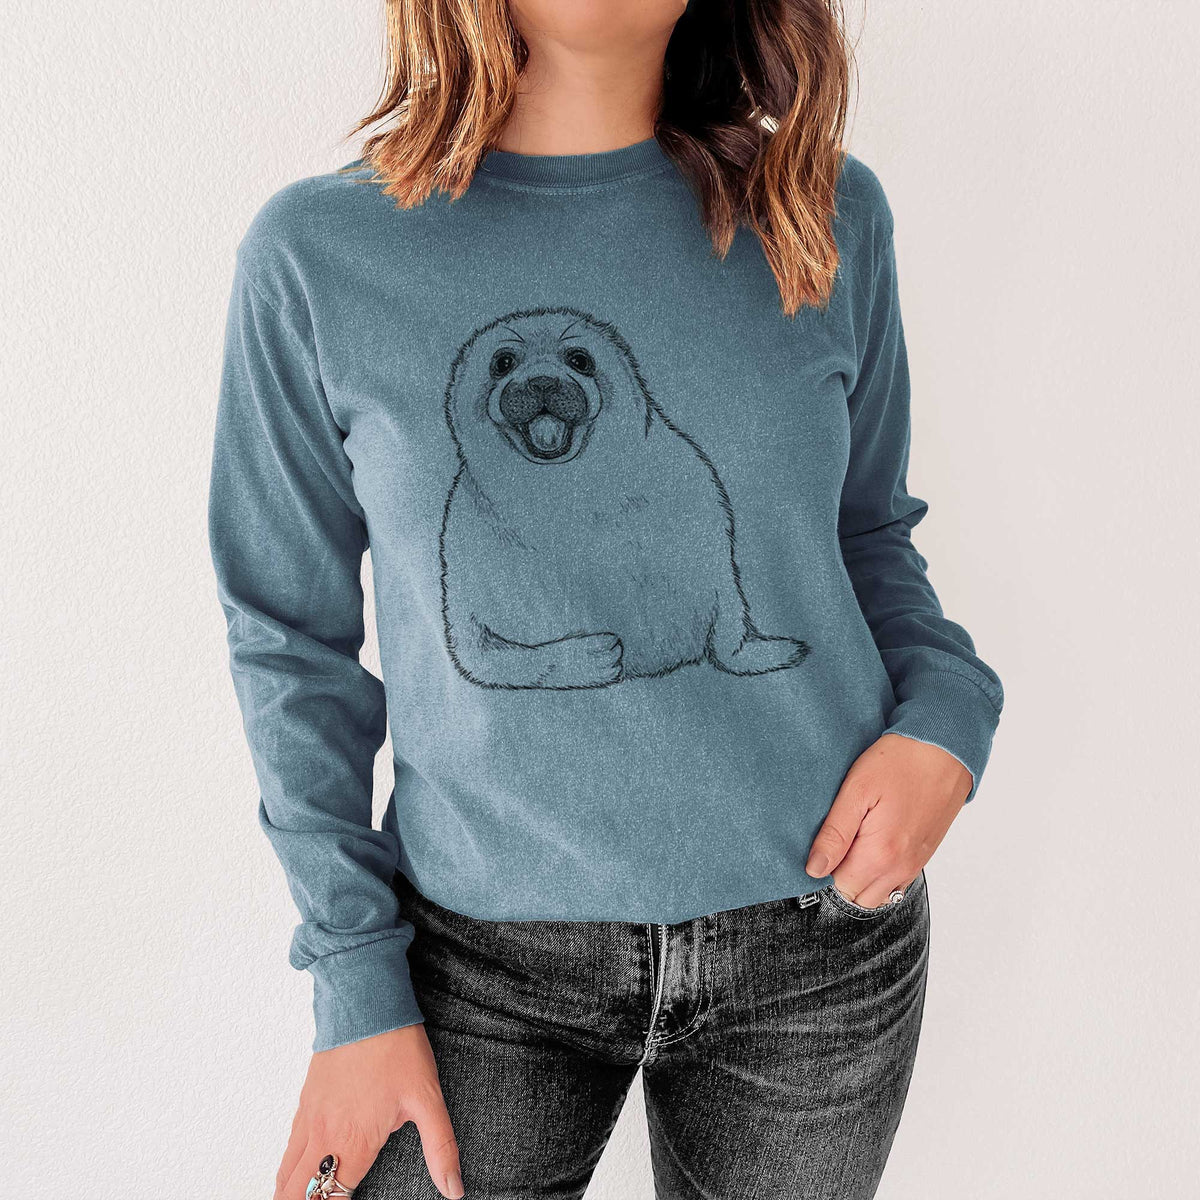 Harp Seal Pup - Pagophilus groenlandicus - Heavyweight 100% Cotton Long Sleeve